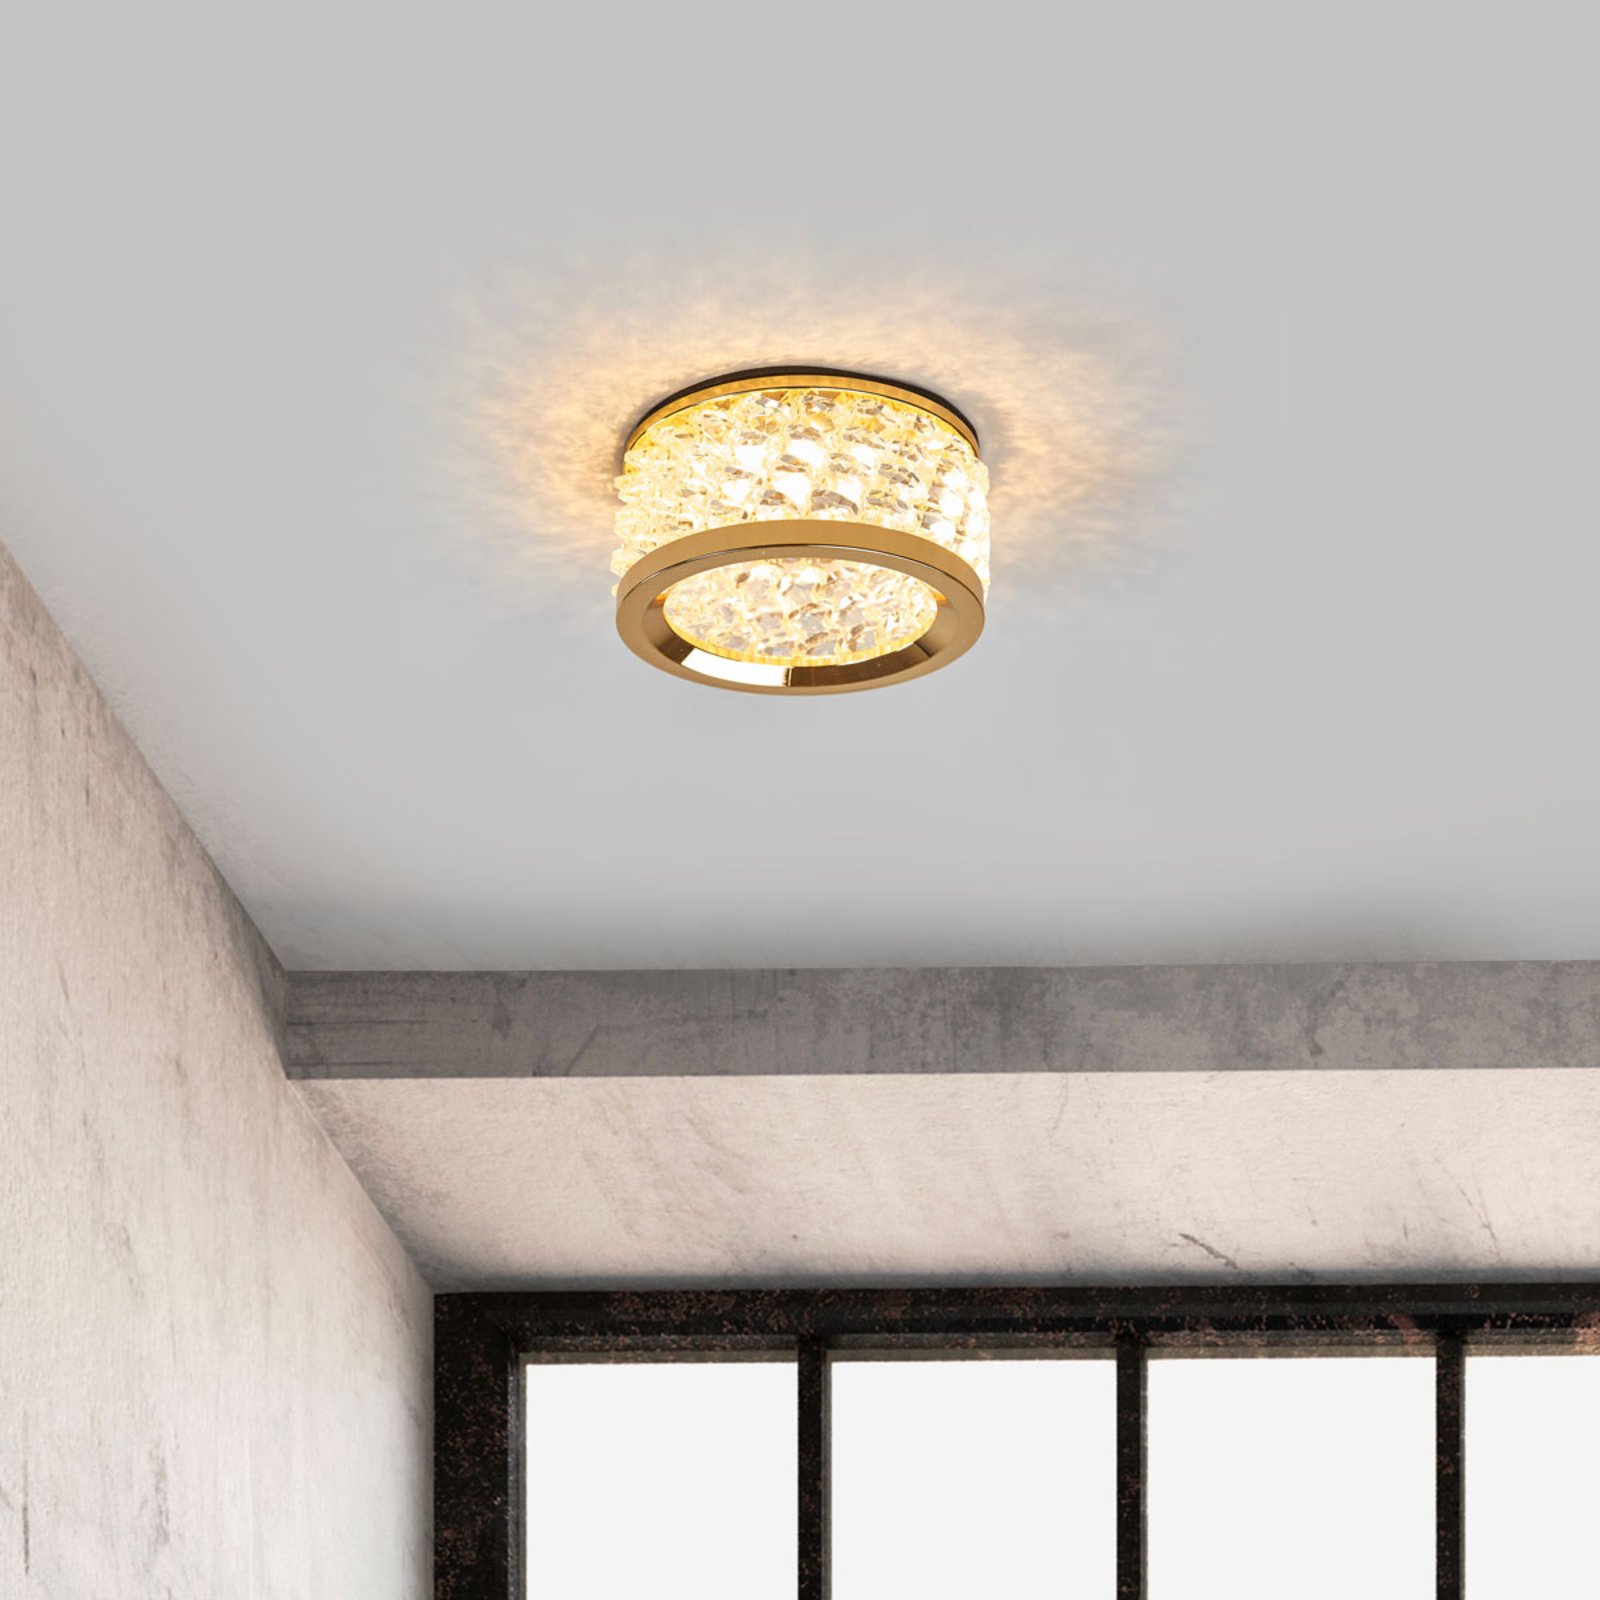 Iwen Built-In Light with Crystal Decoration Gold